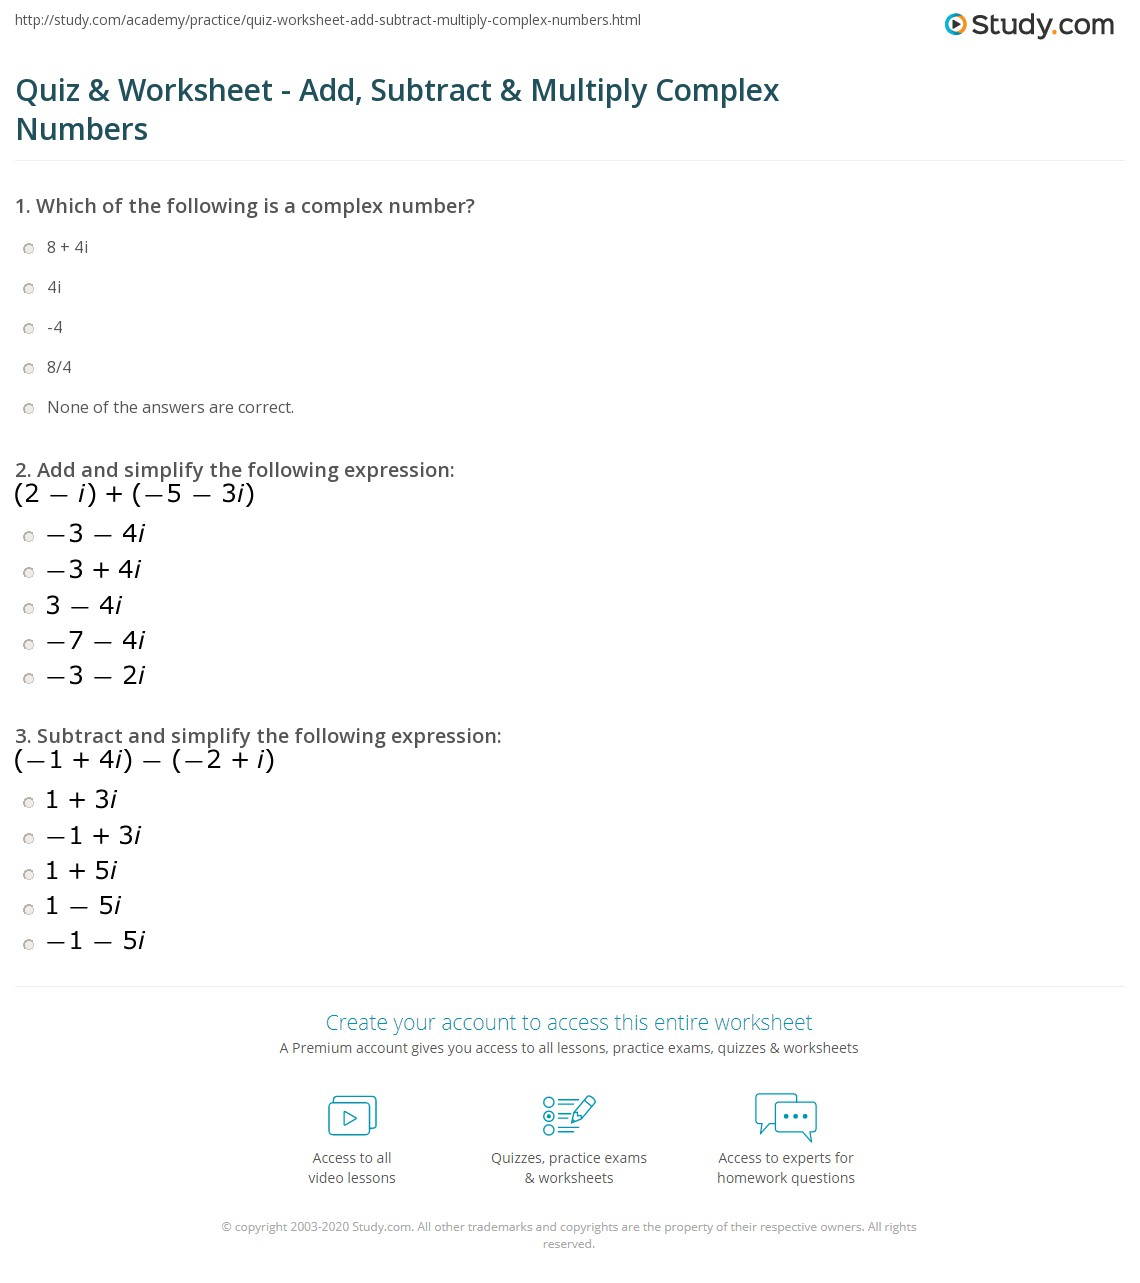 multiplying-and-dividing-complex-numbers-worksheet-1-answers-2022-numbersworksheets